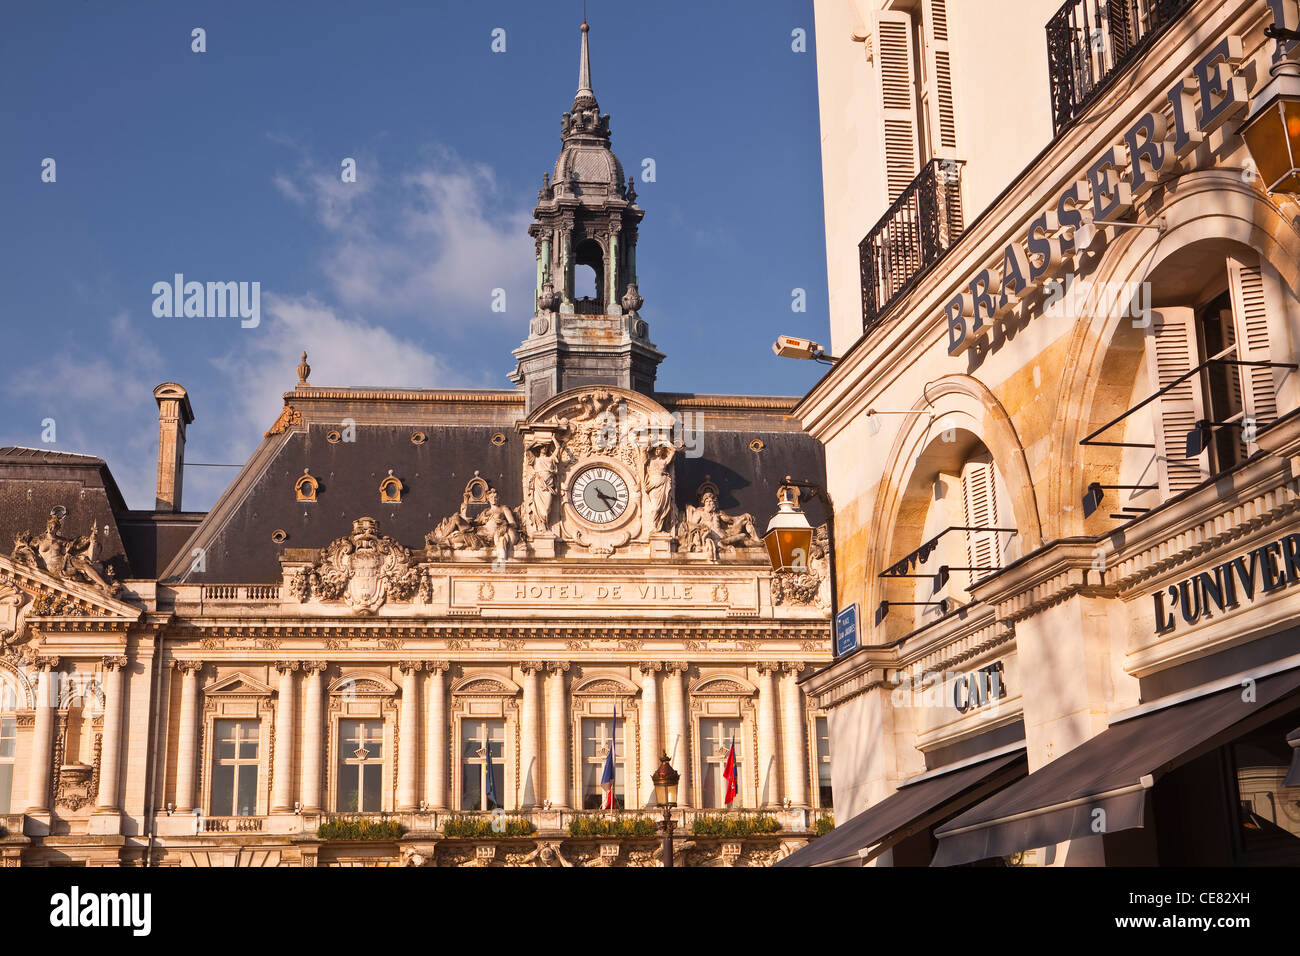 The facade of the Hotel de Ville or town hall in Tours, France. It was designed by Victor Laloux. Stock Photo